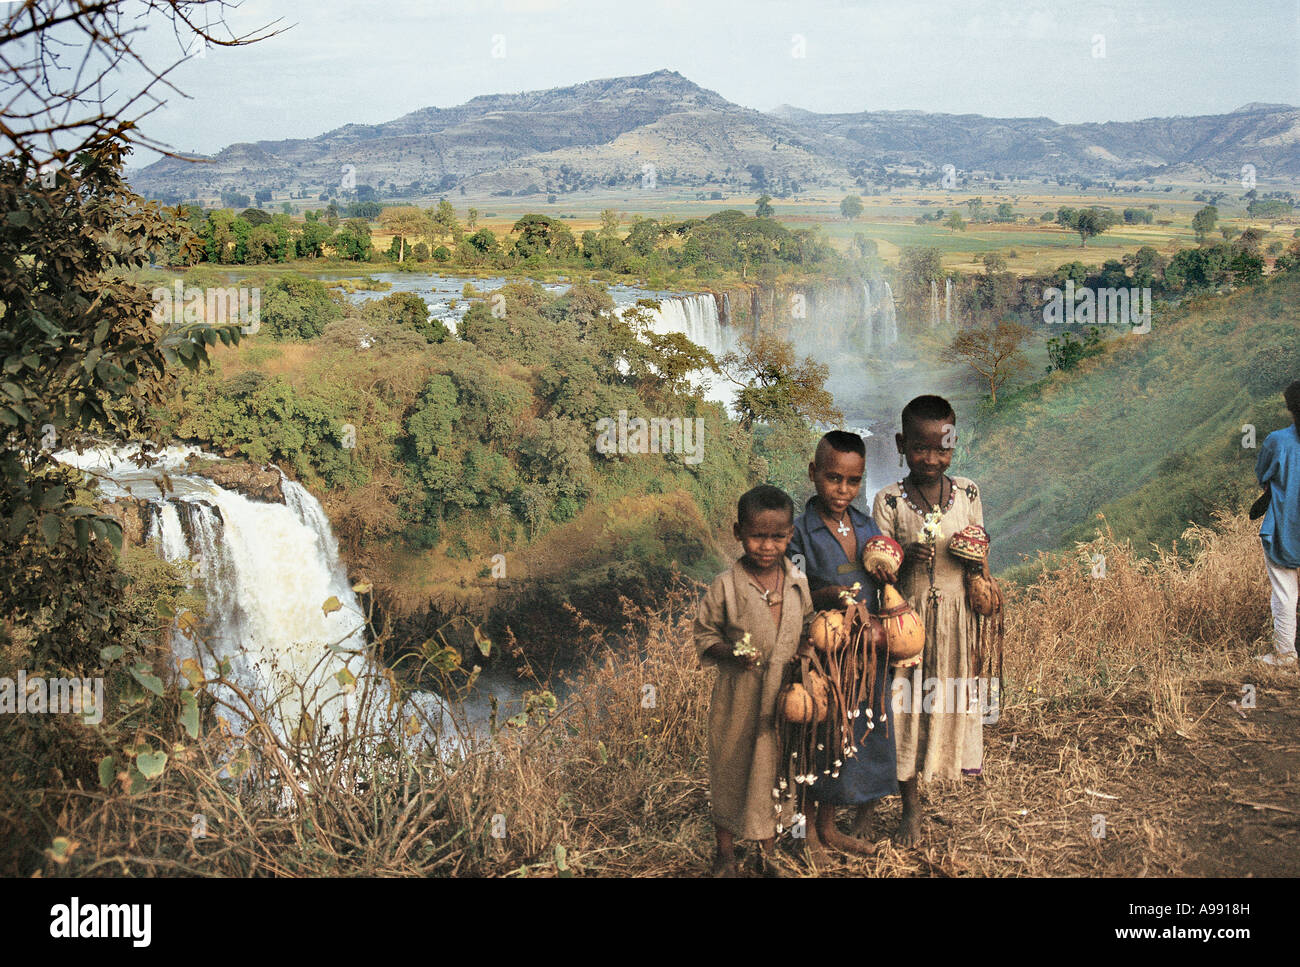 African children offering gourds for sale Blue Nile or Tissiat Falls near Bahir Dar Ethiopia Stock Photo